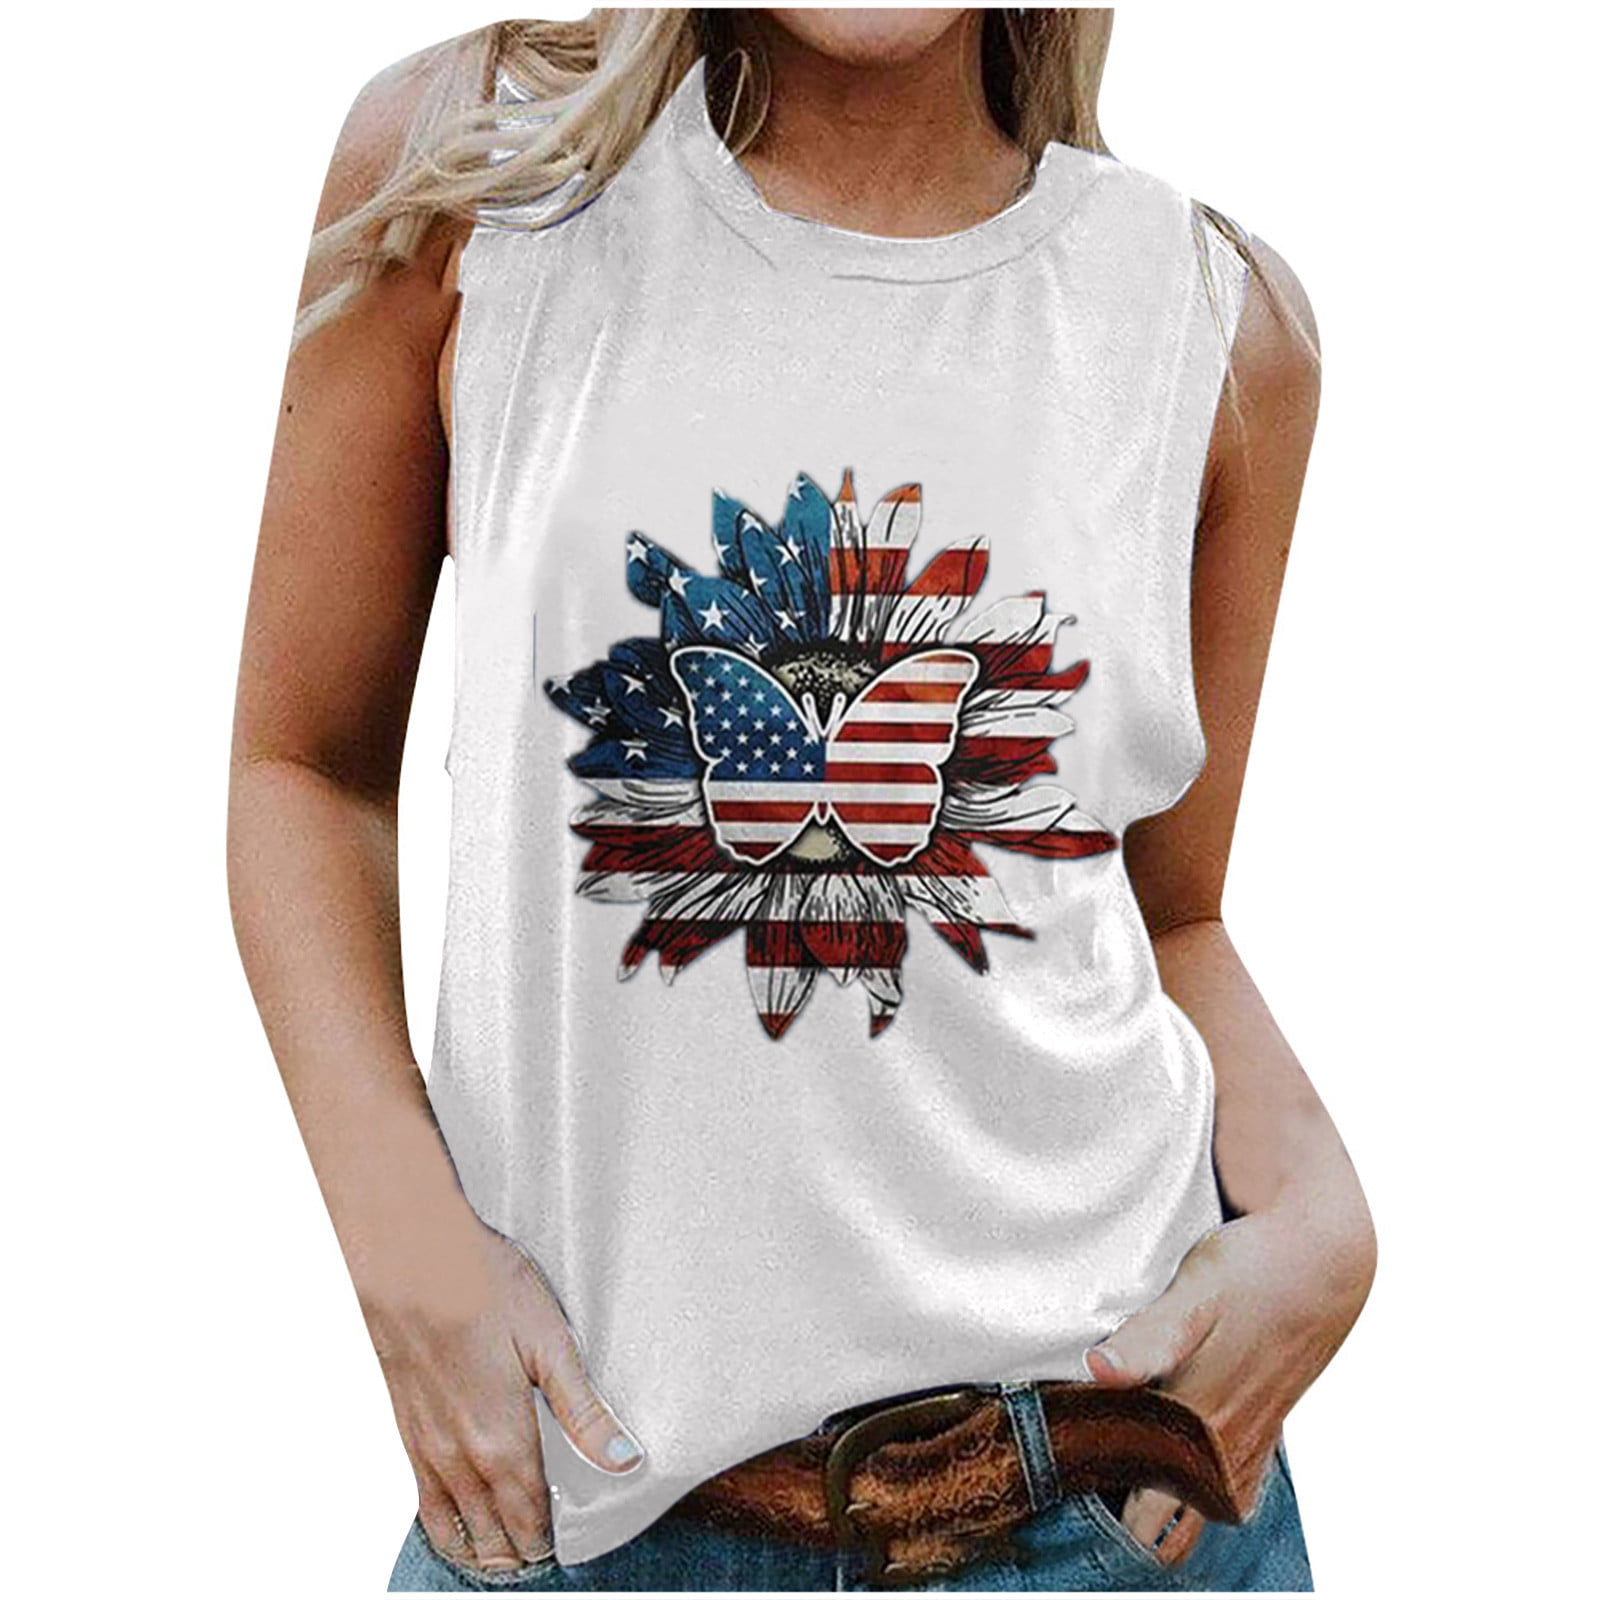 Toponly Womens V-neck Flag Sleeveless Knot Tunic Stars and Strips Patriotic Tank Tops 